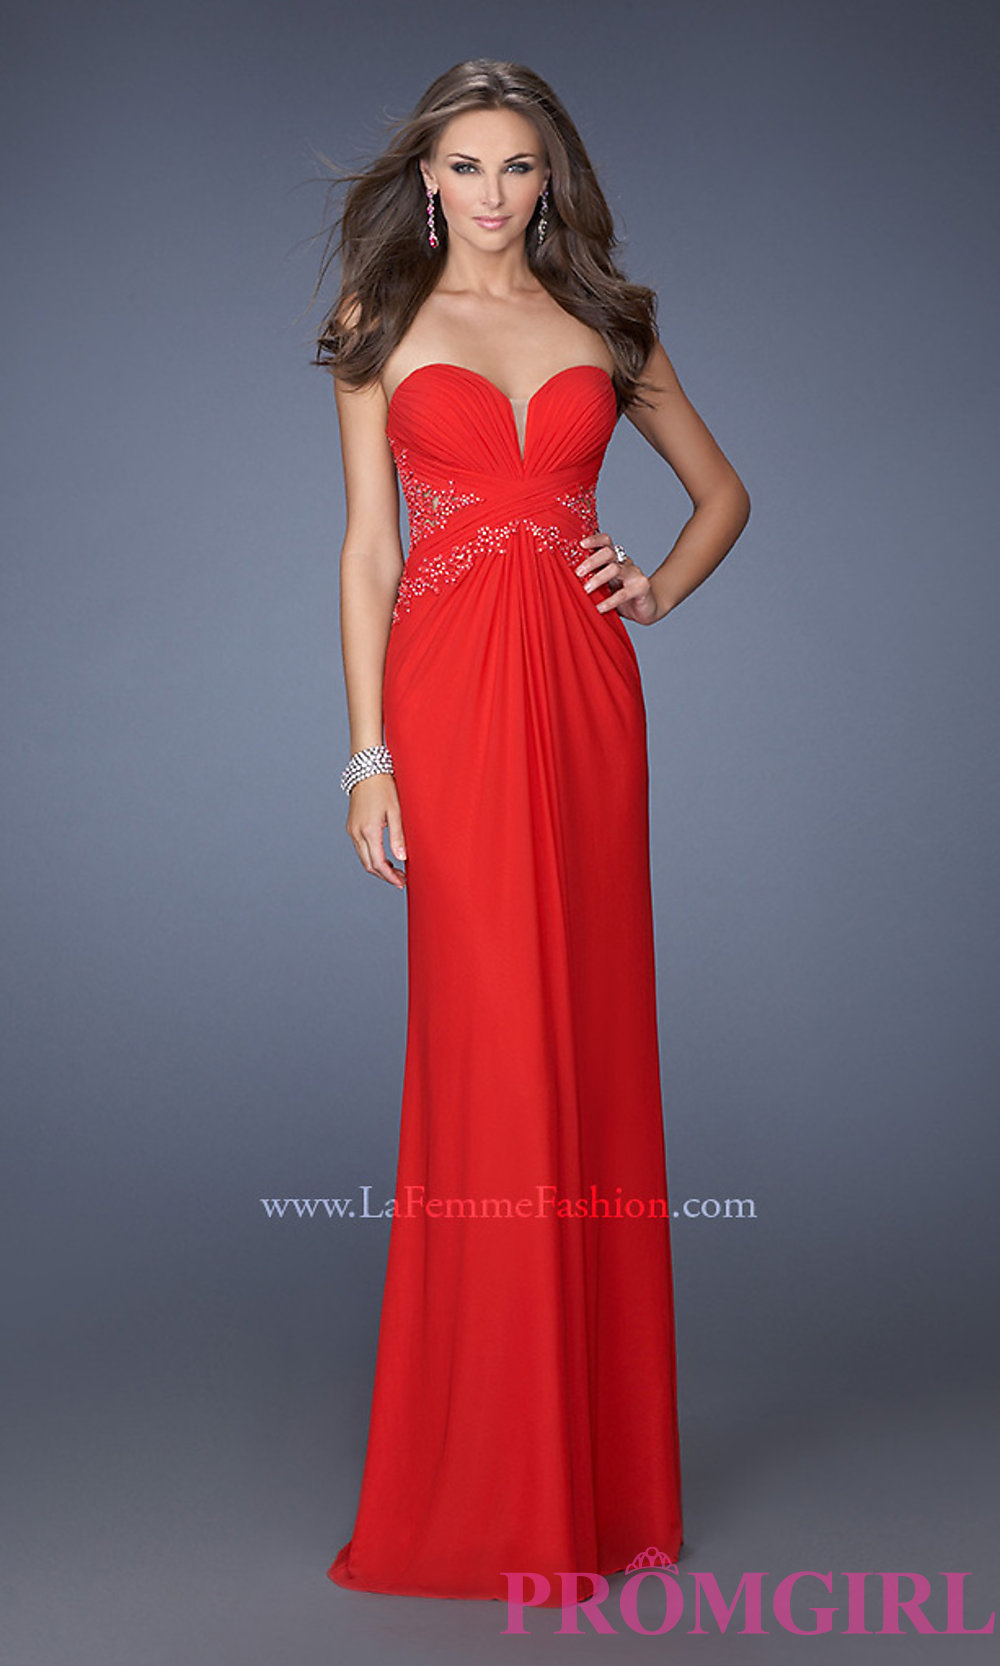 Strapless Red Bridesmaid Dresses & Online Fashion Review